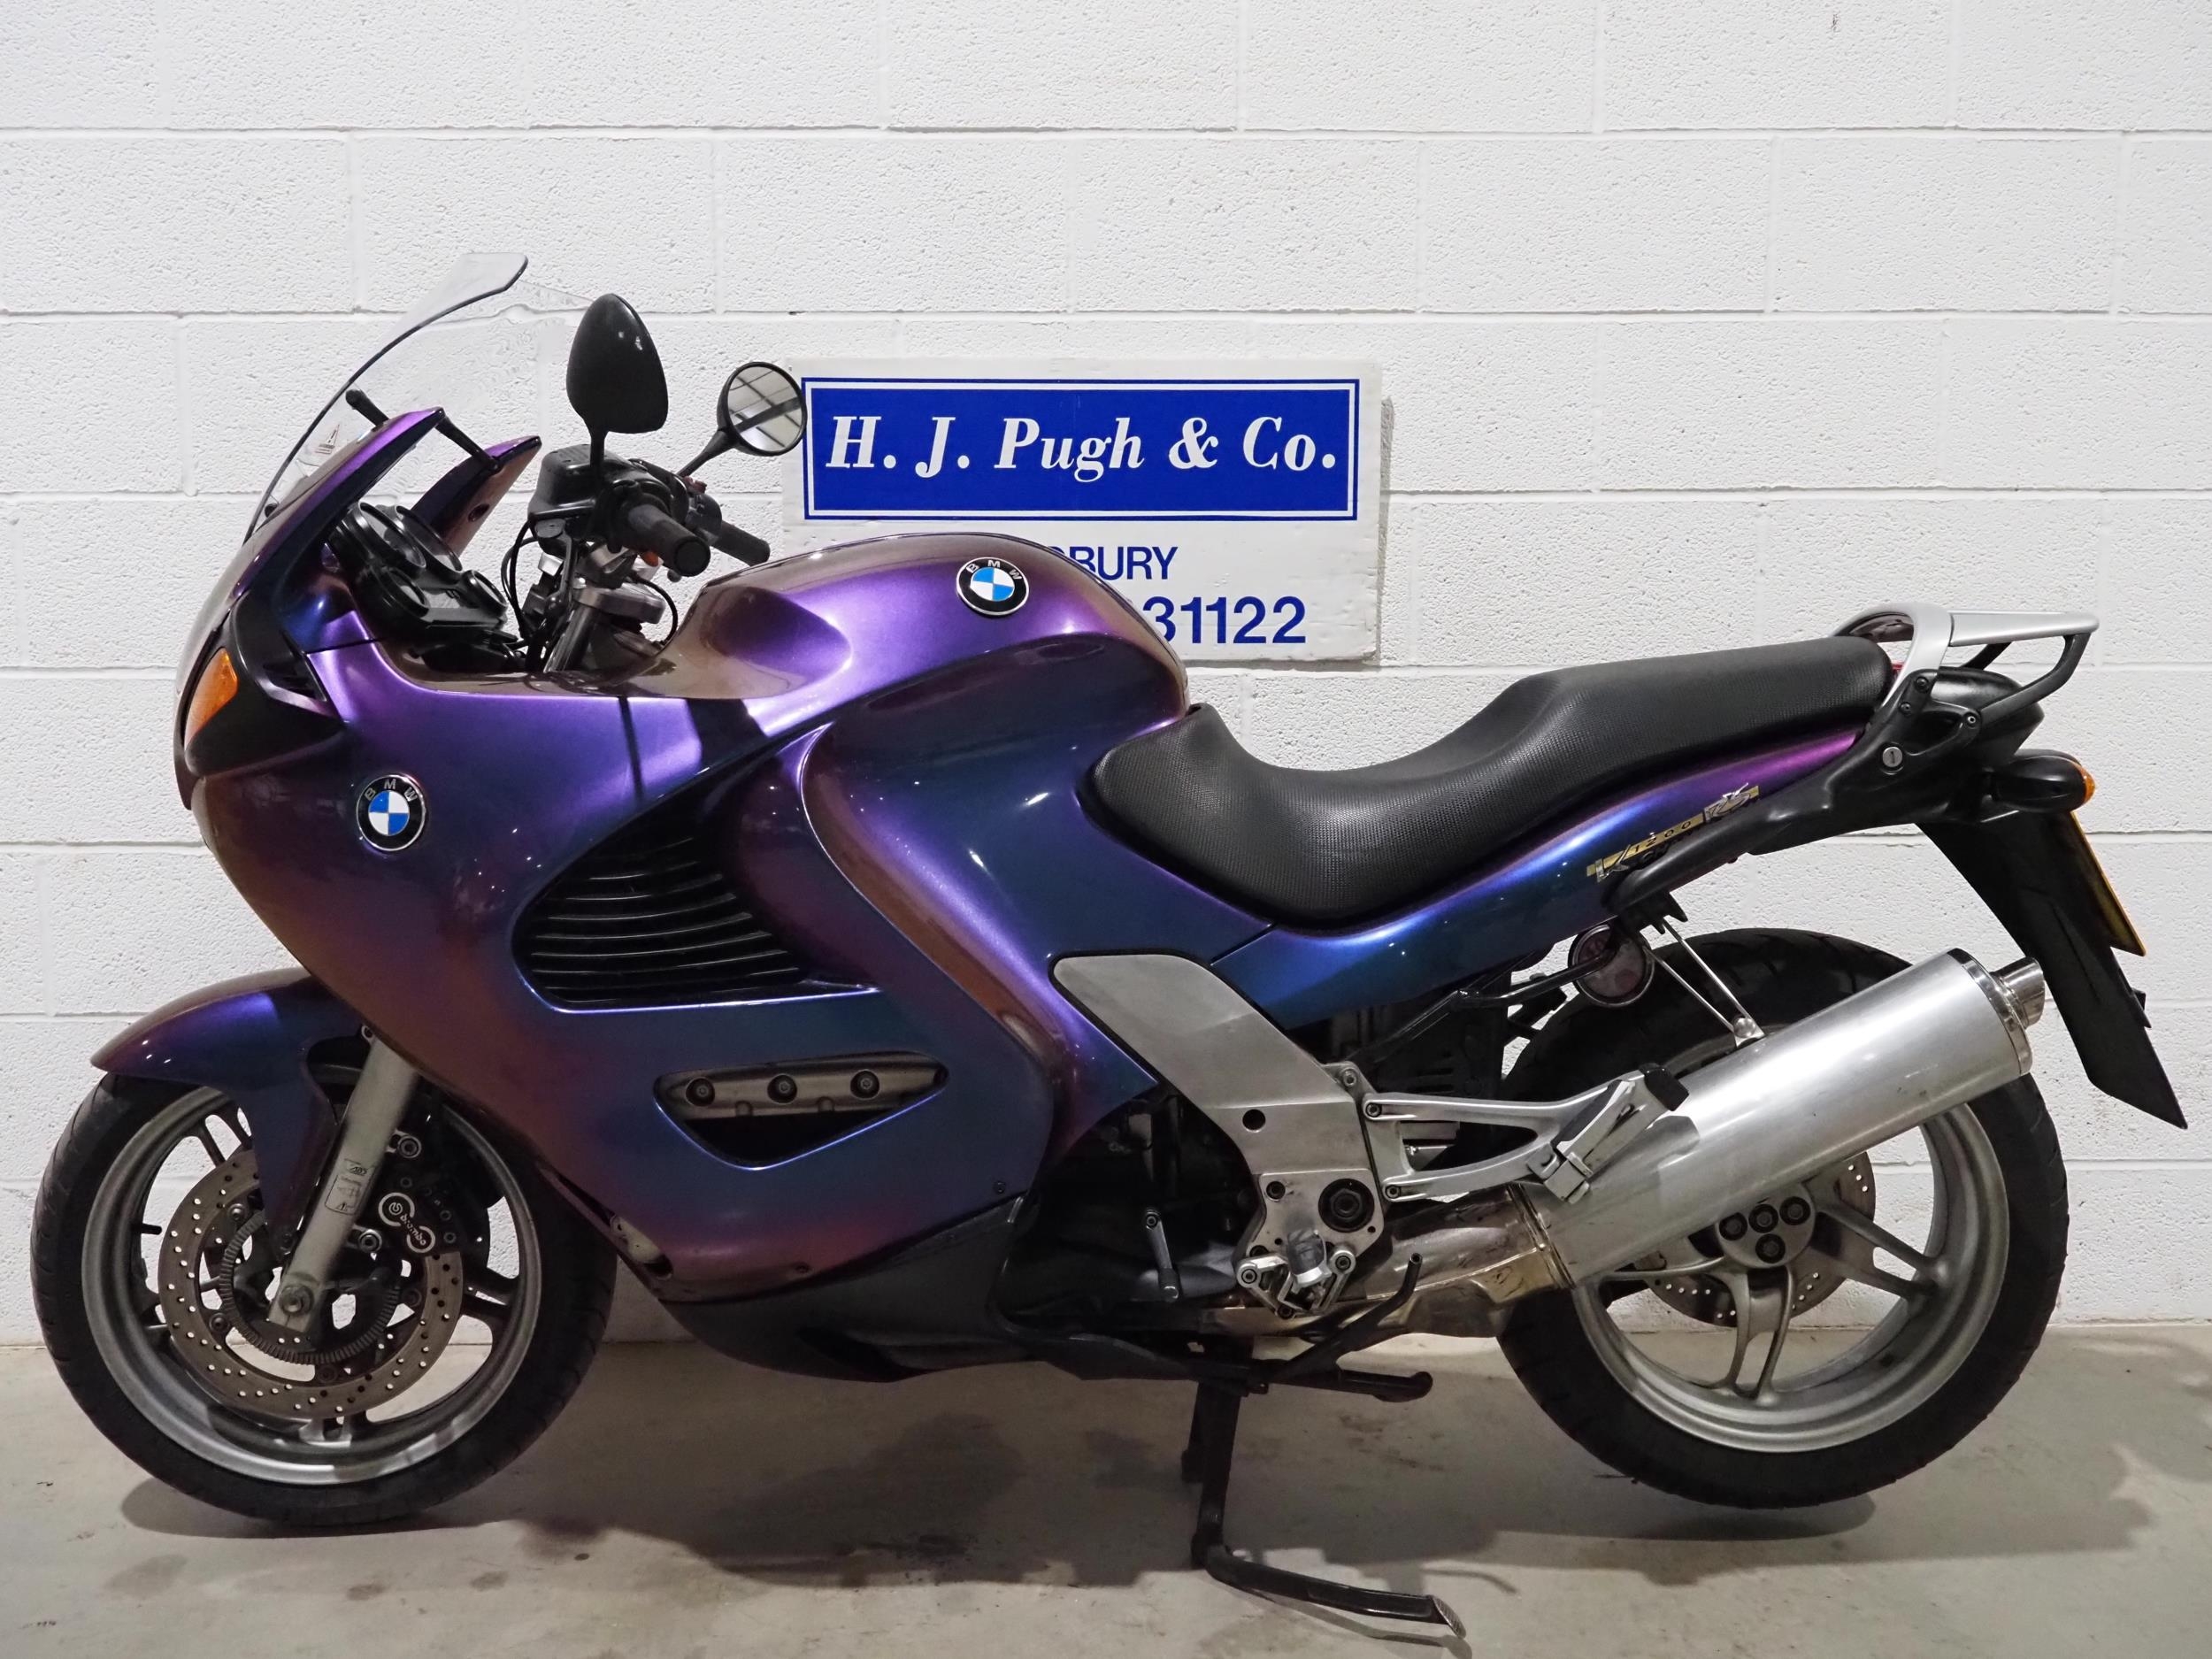 BMW K1200 RS motorcycle. 1997. 1171cc. Runs and rides, MOT until 18.03.25. Comes with heated - Image 6 of 6